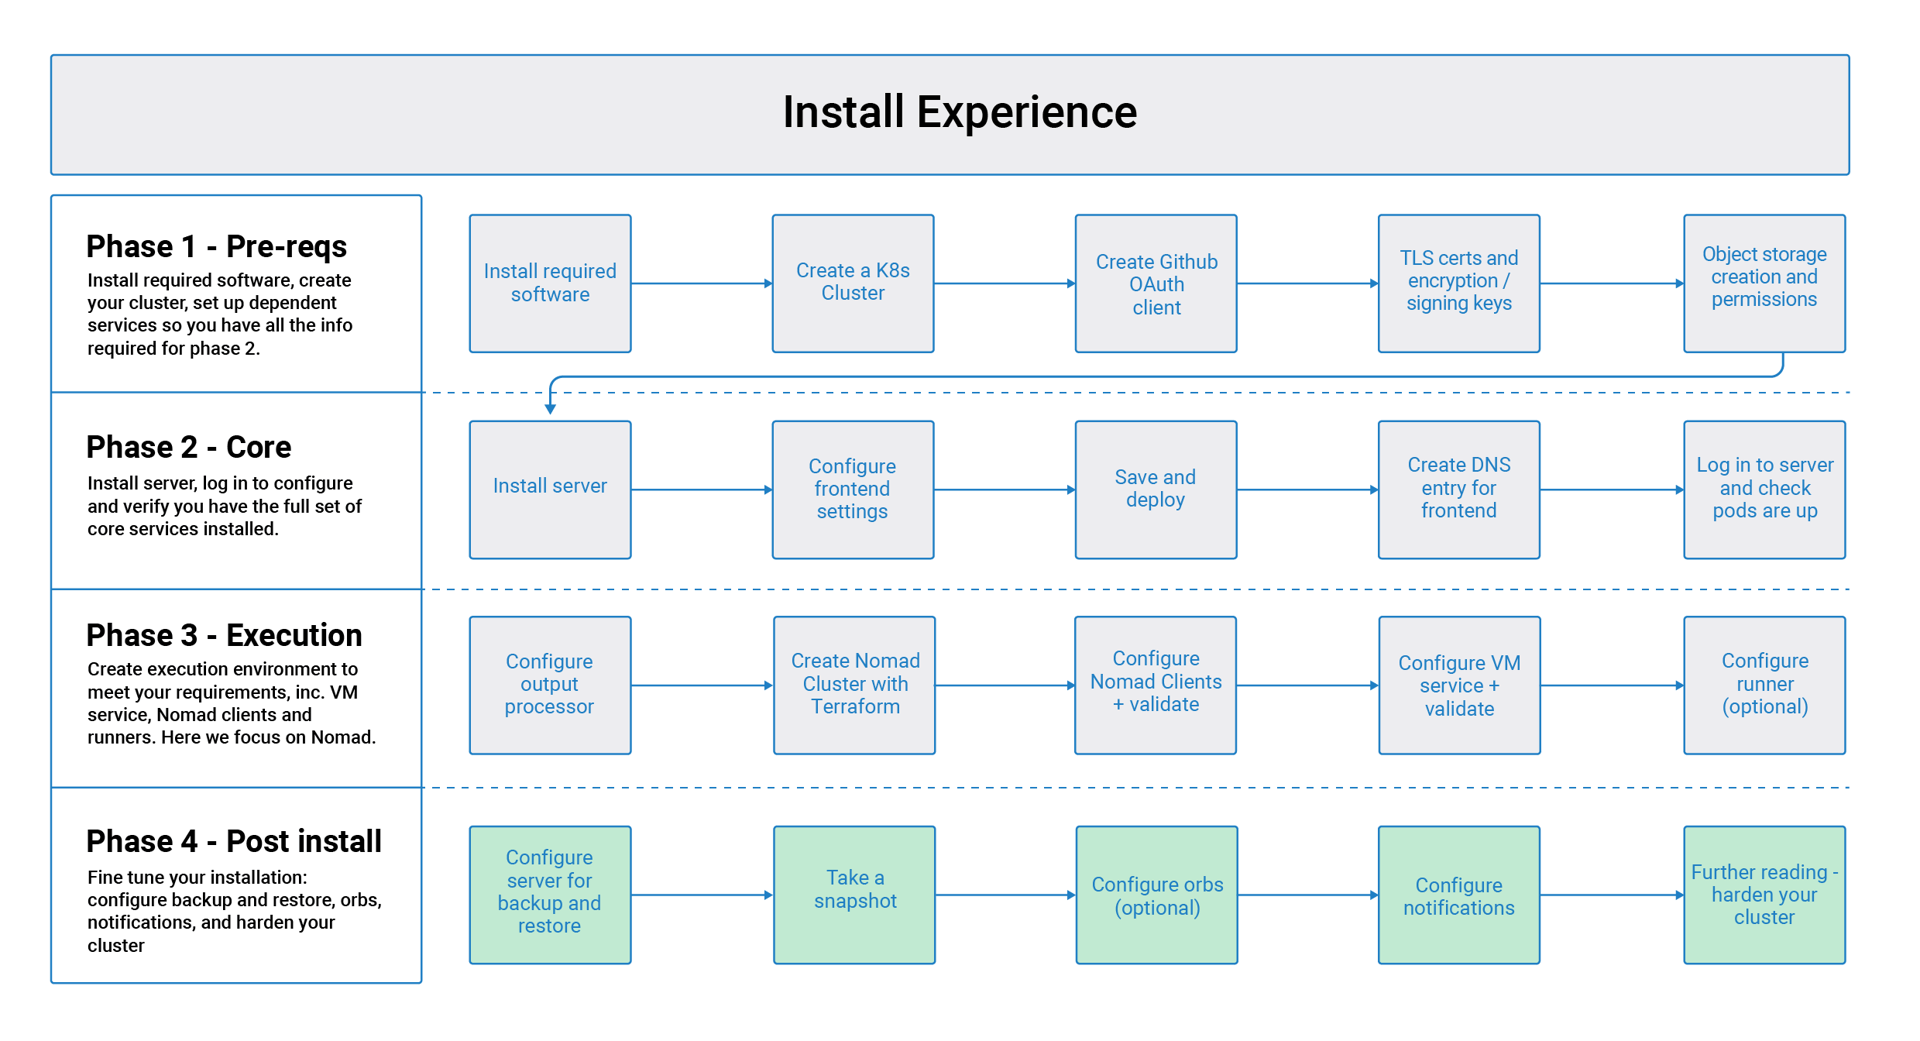 Flow chart showing the installation flow for server 3.x with phase 4 highlighted